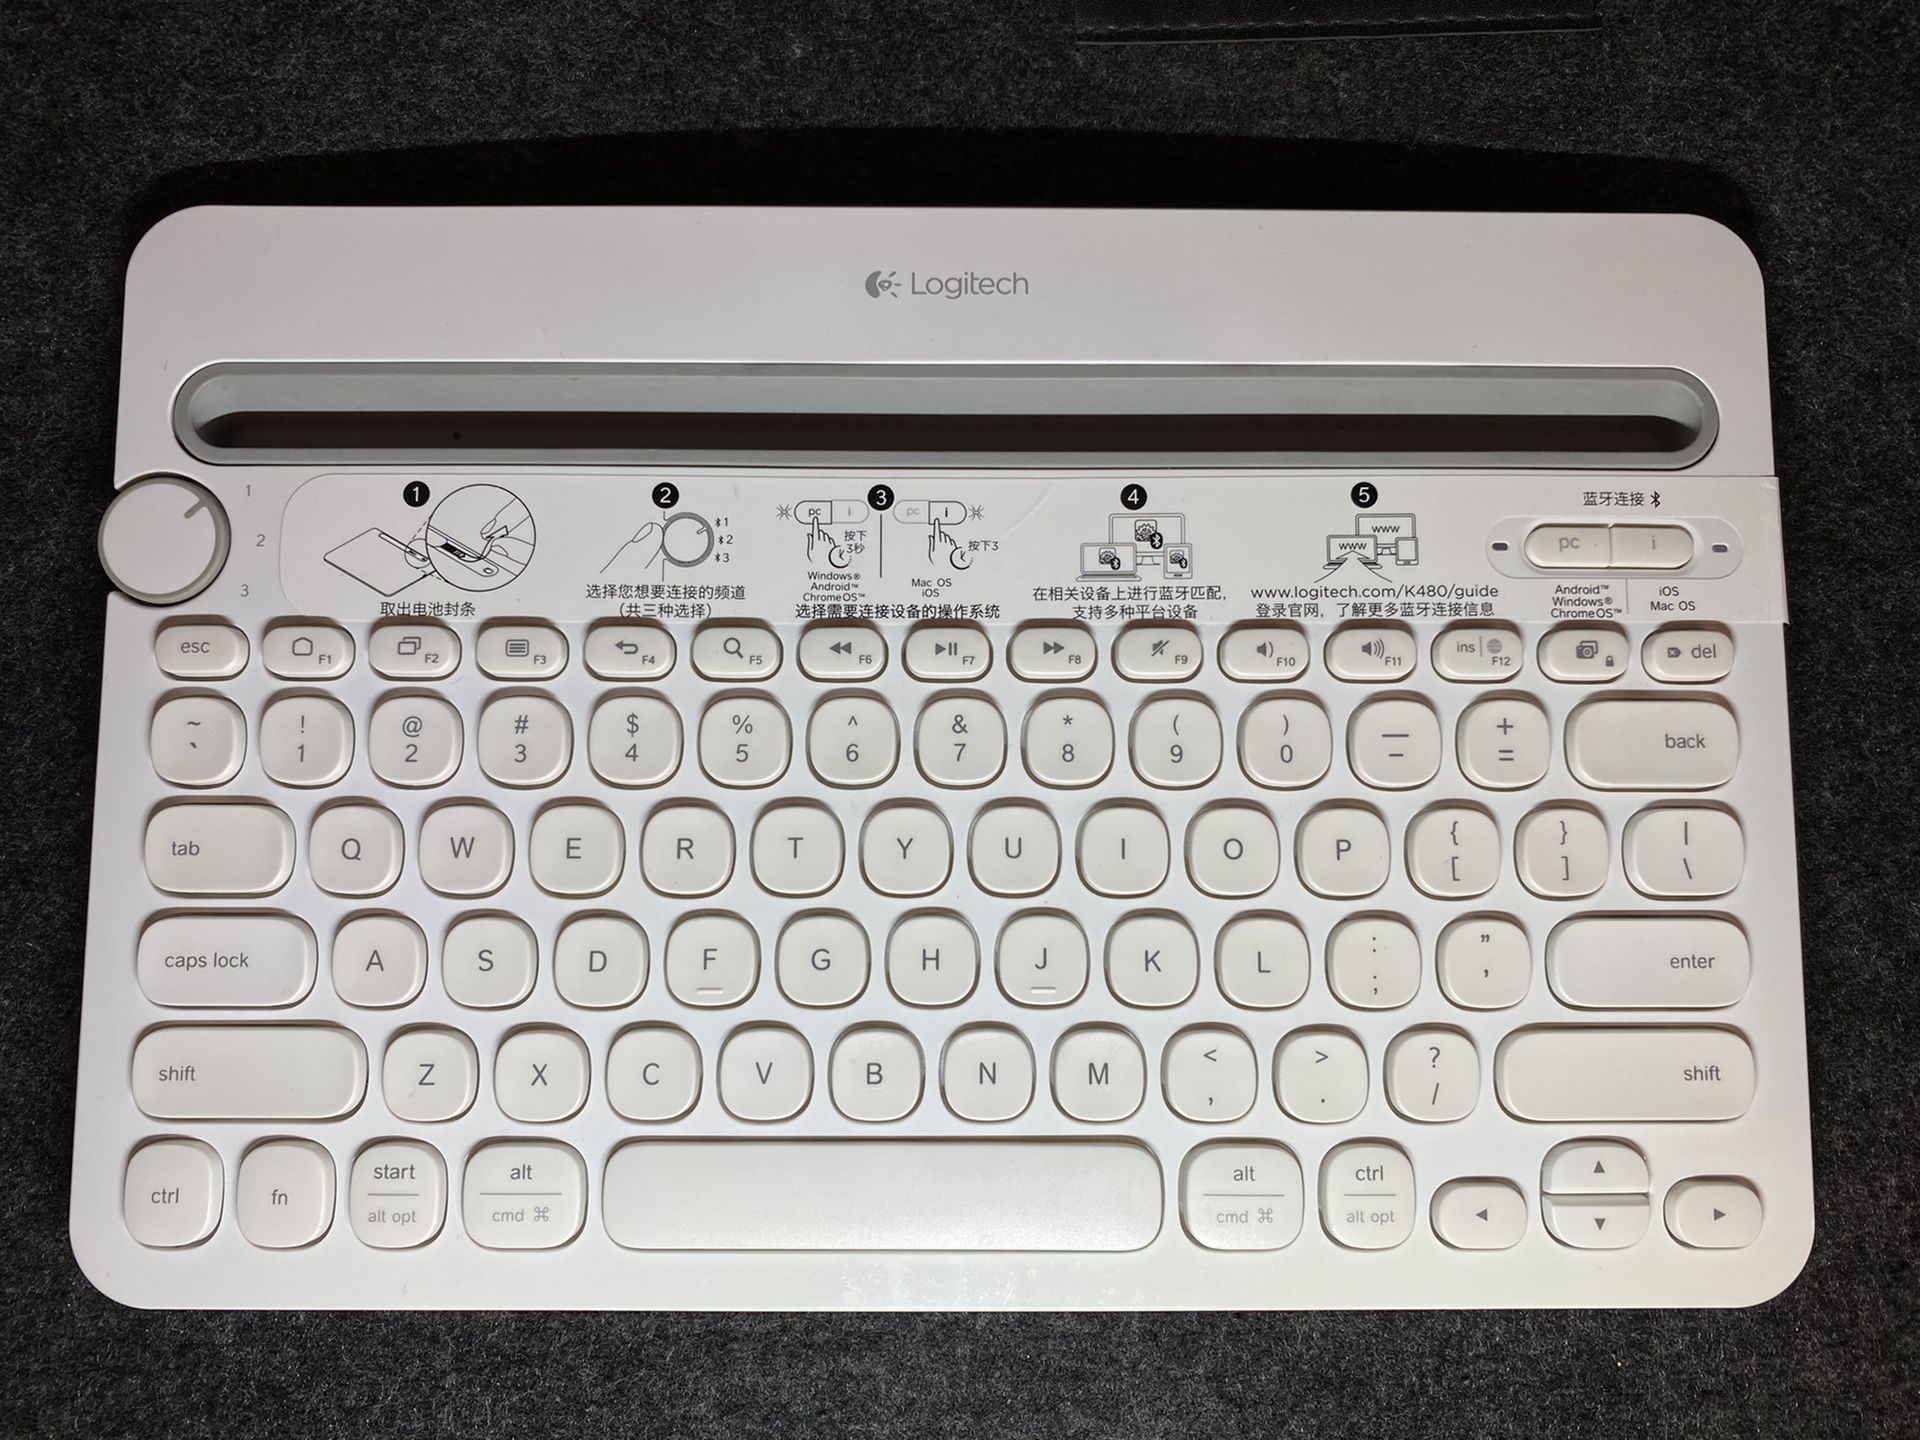 Logitech Bluetooth Multi-Device Keyboard K480 – White – for Windows and Mac Computers, Android and iOS Tablets and Smartphones